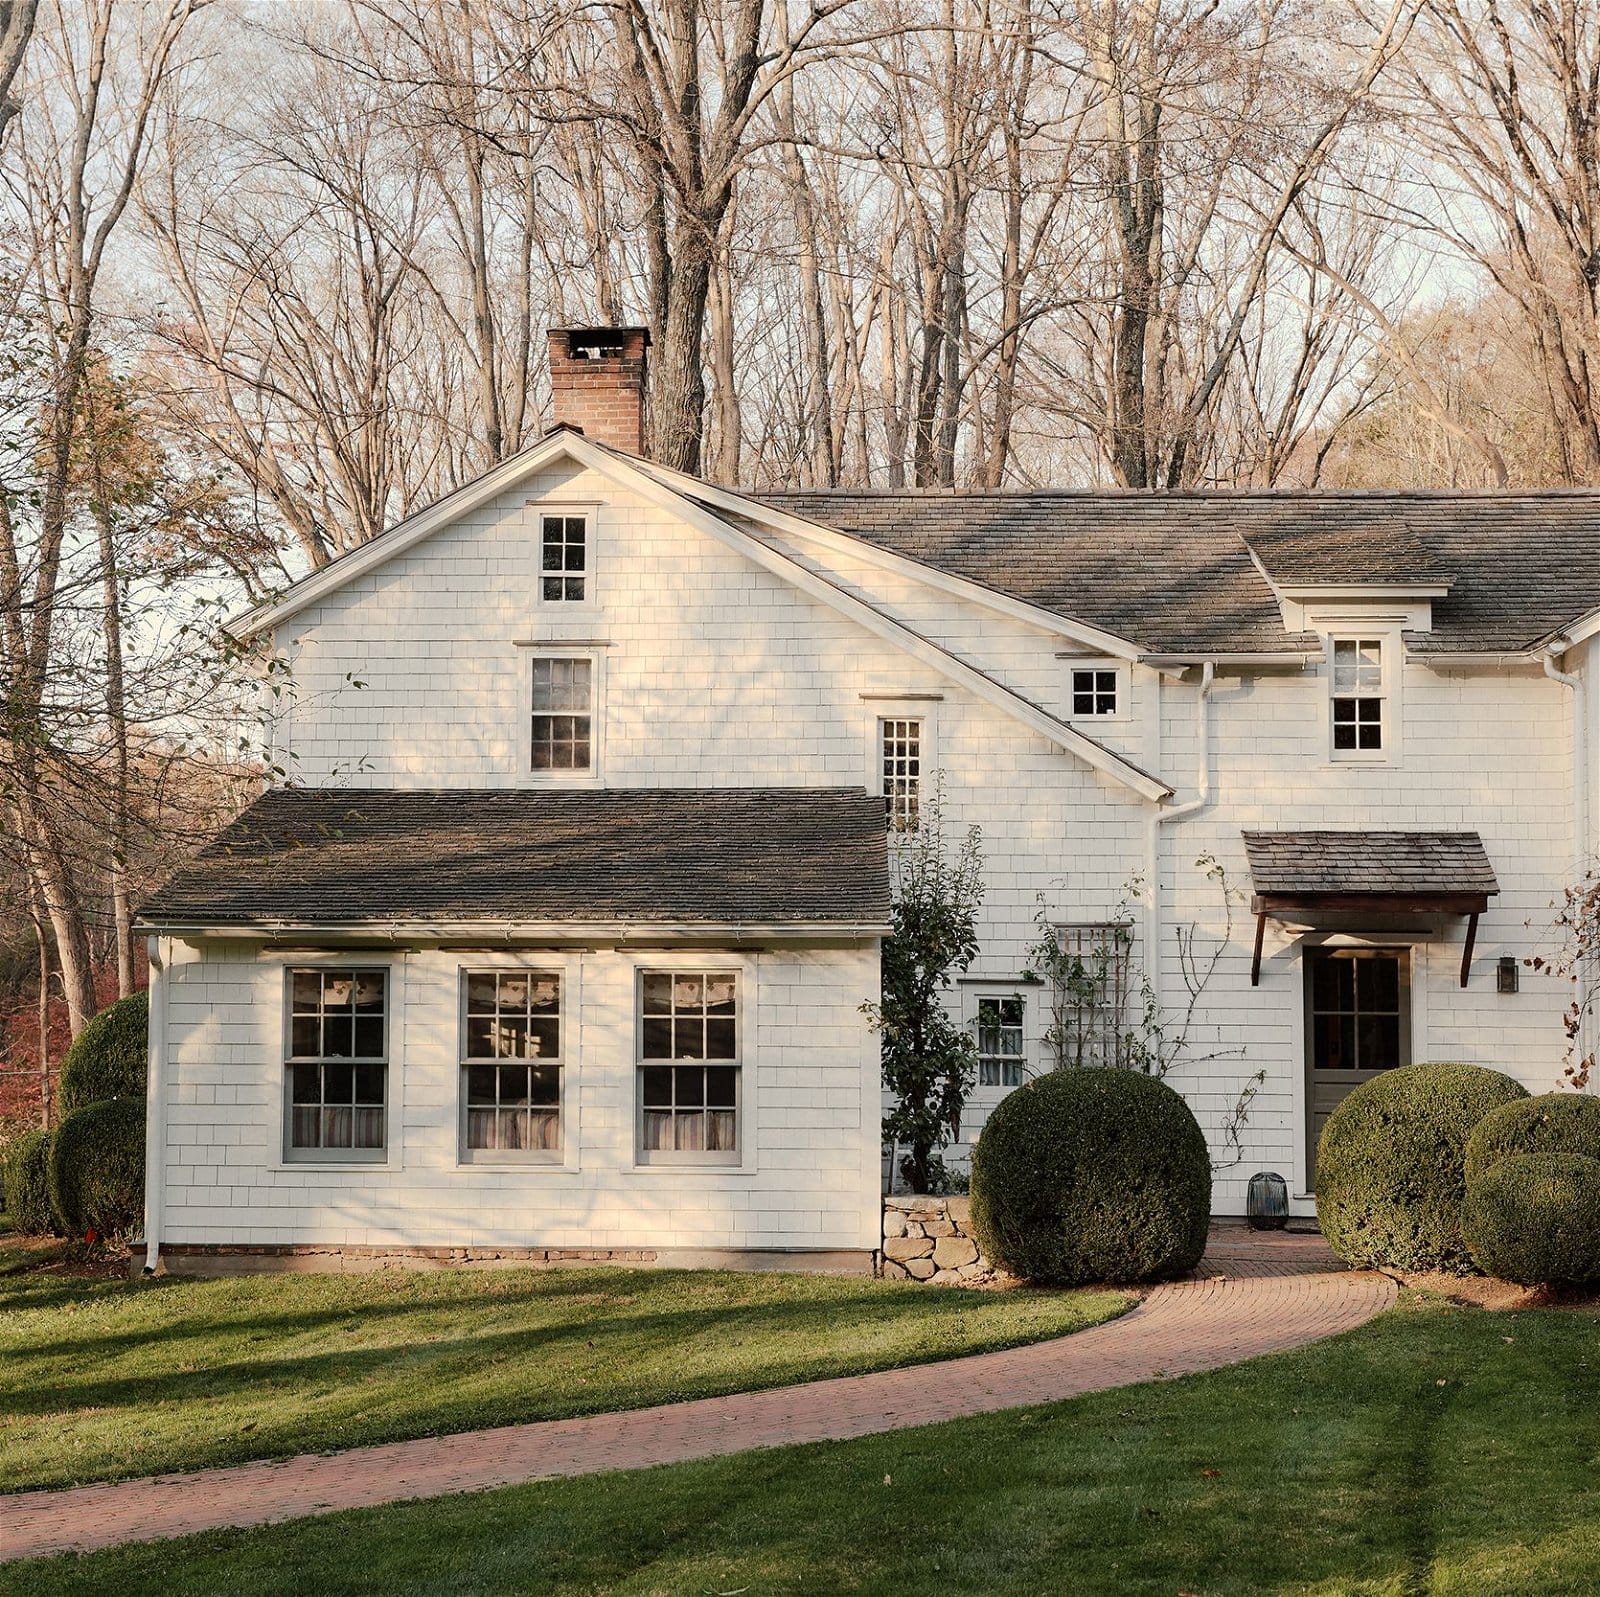 Farmhouse Chic Gets a Youthful Update in This Ultra-Colorful Country Home